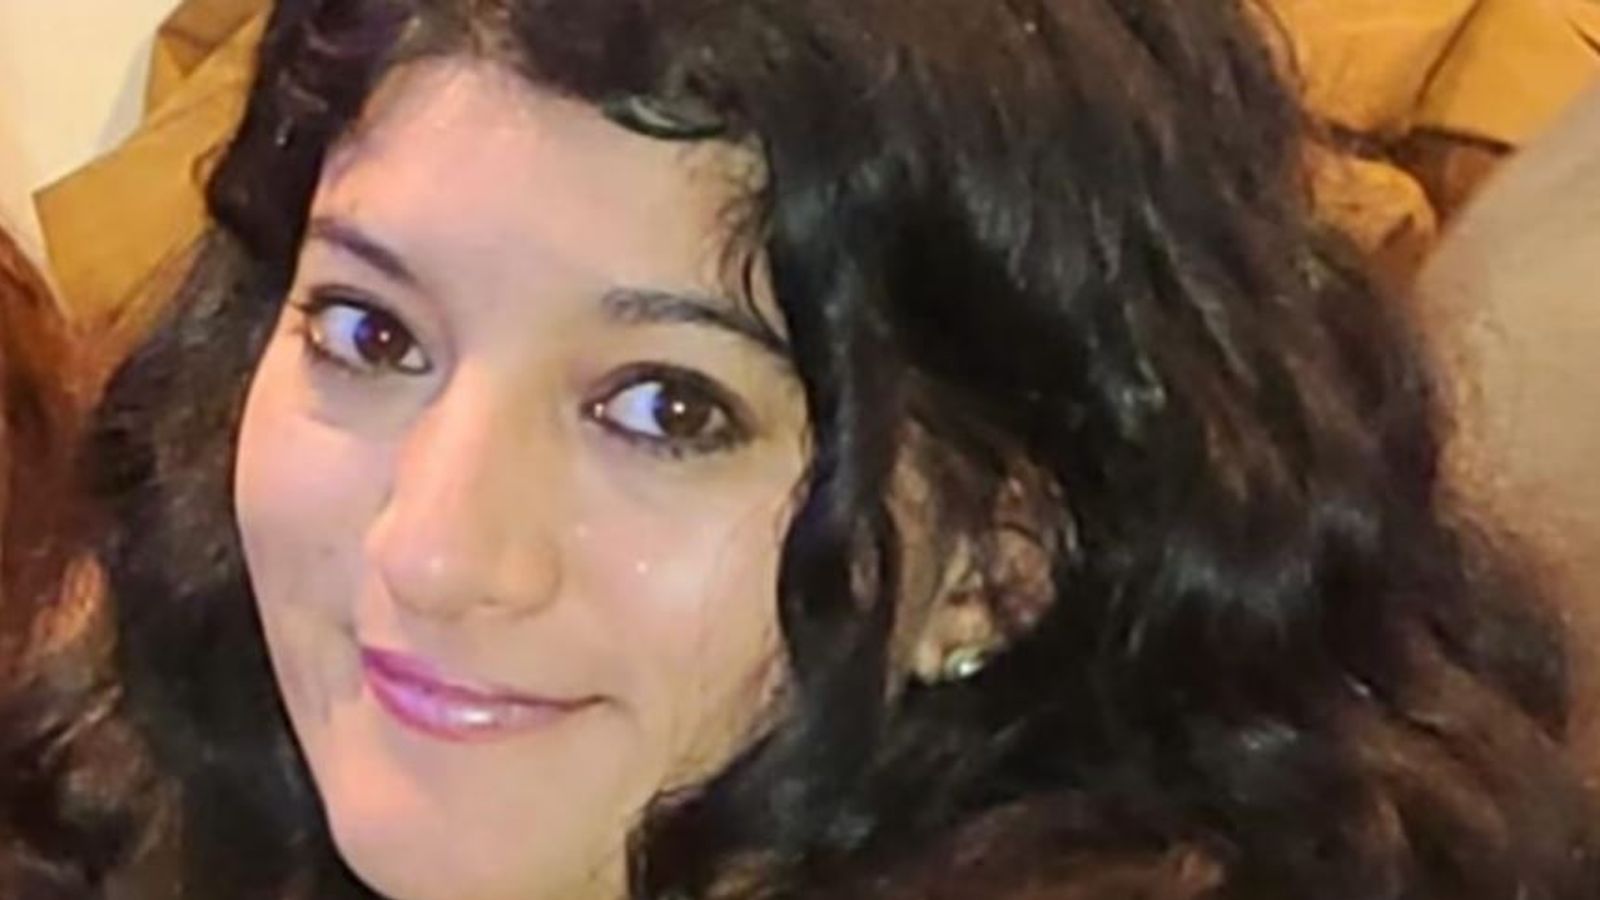 Zara Aleena: Law graduate's aunt calls probation failings around her killer 'extremely distressing'